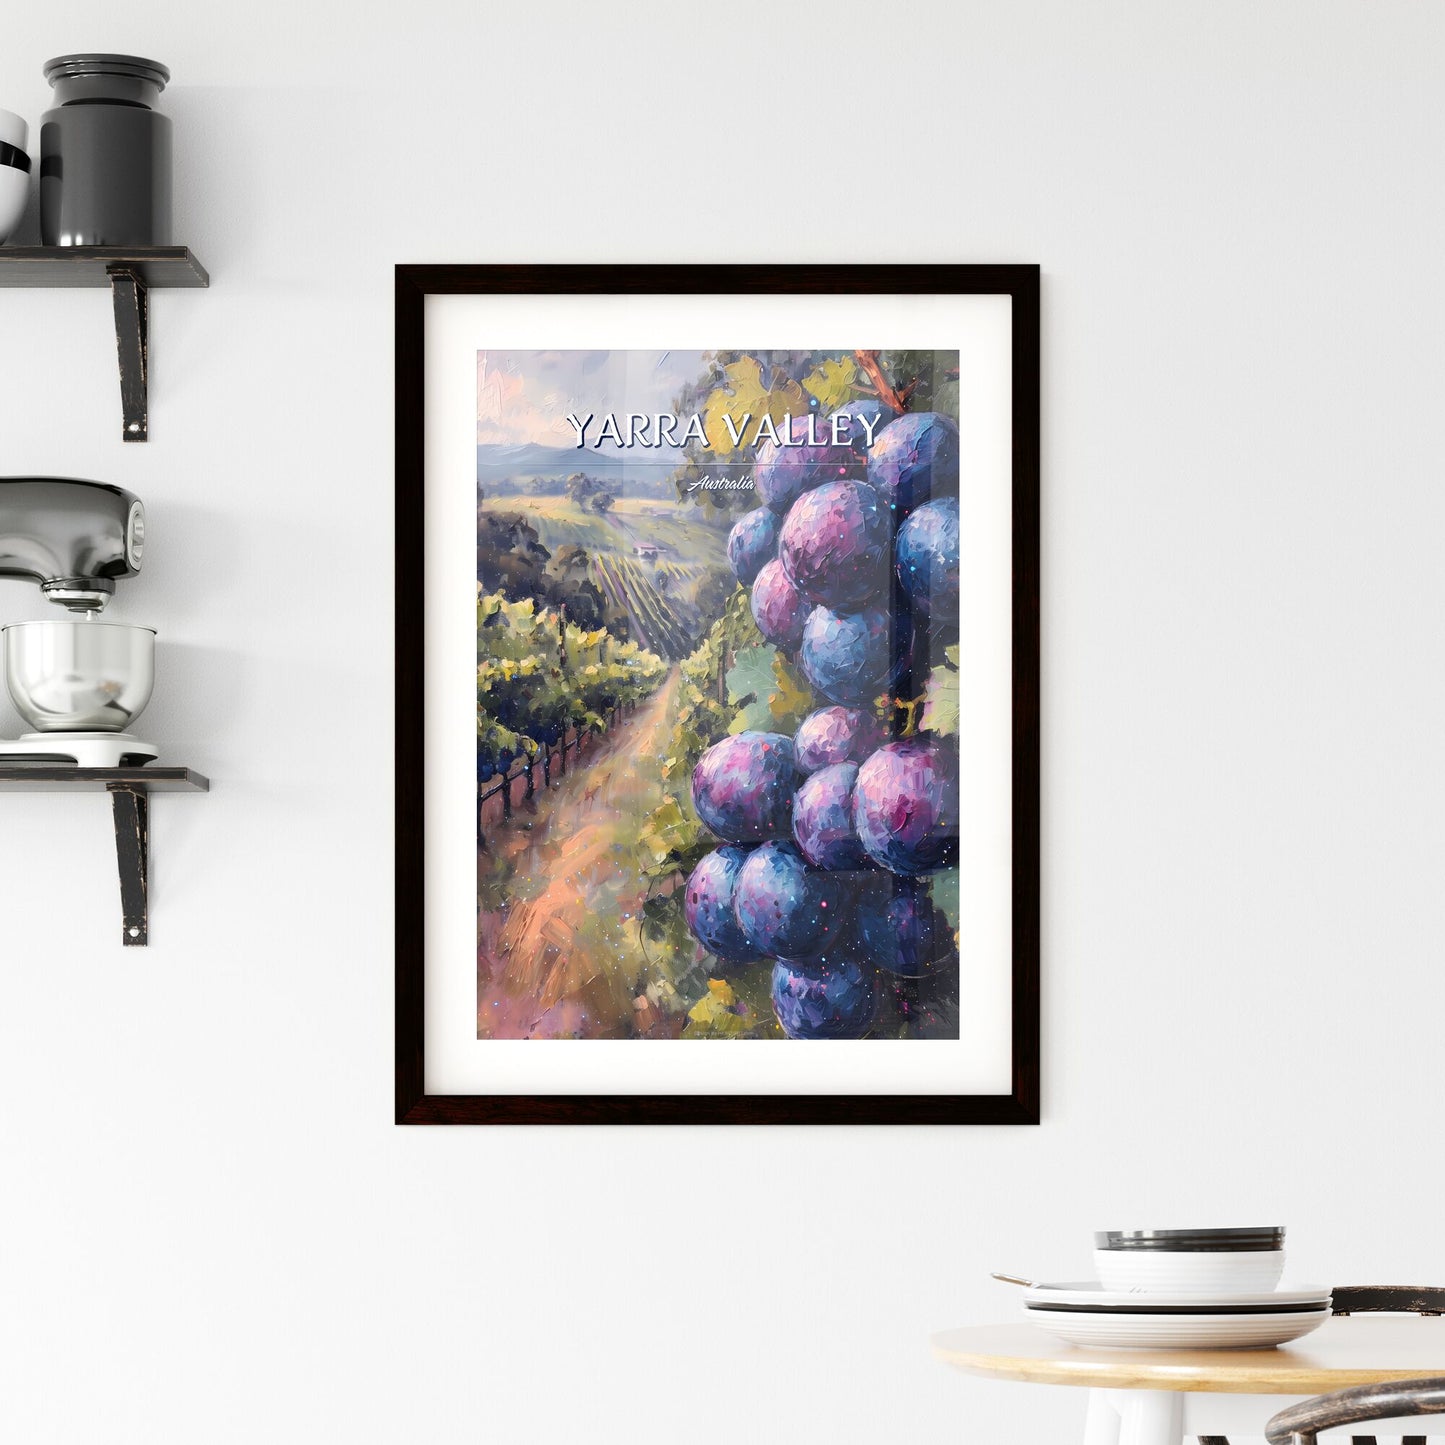 Yarra Valley, Australia - Art print of a painting of grapes on a vine Default Title